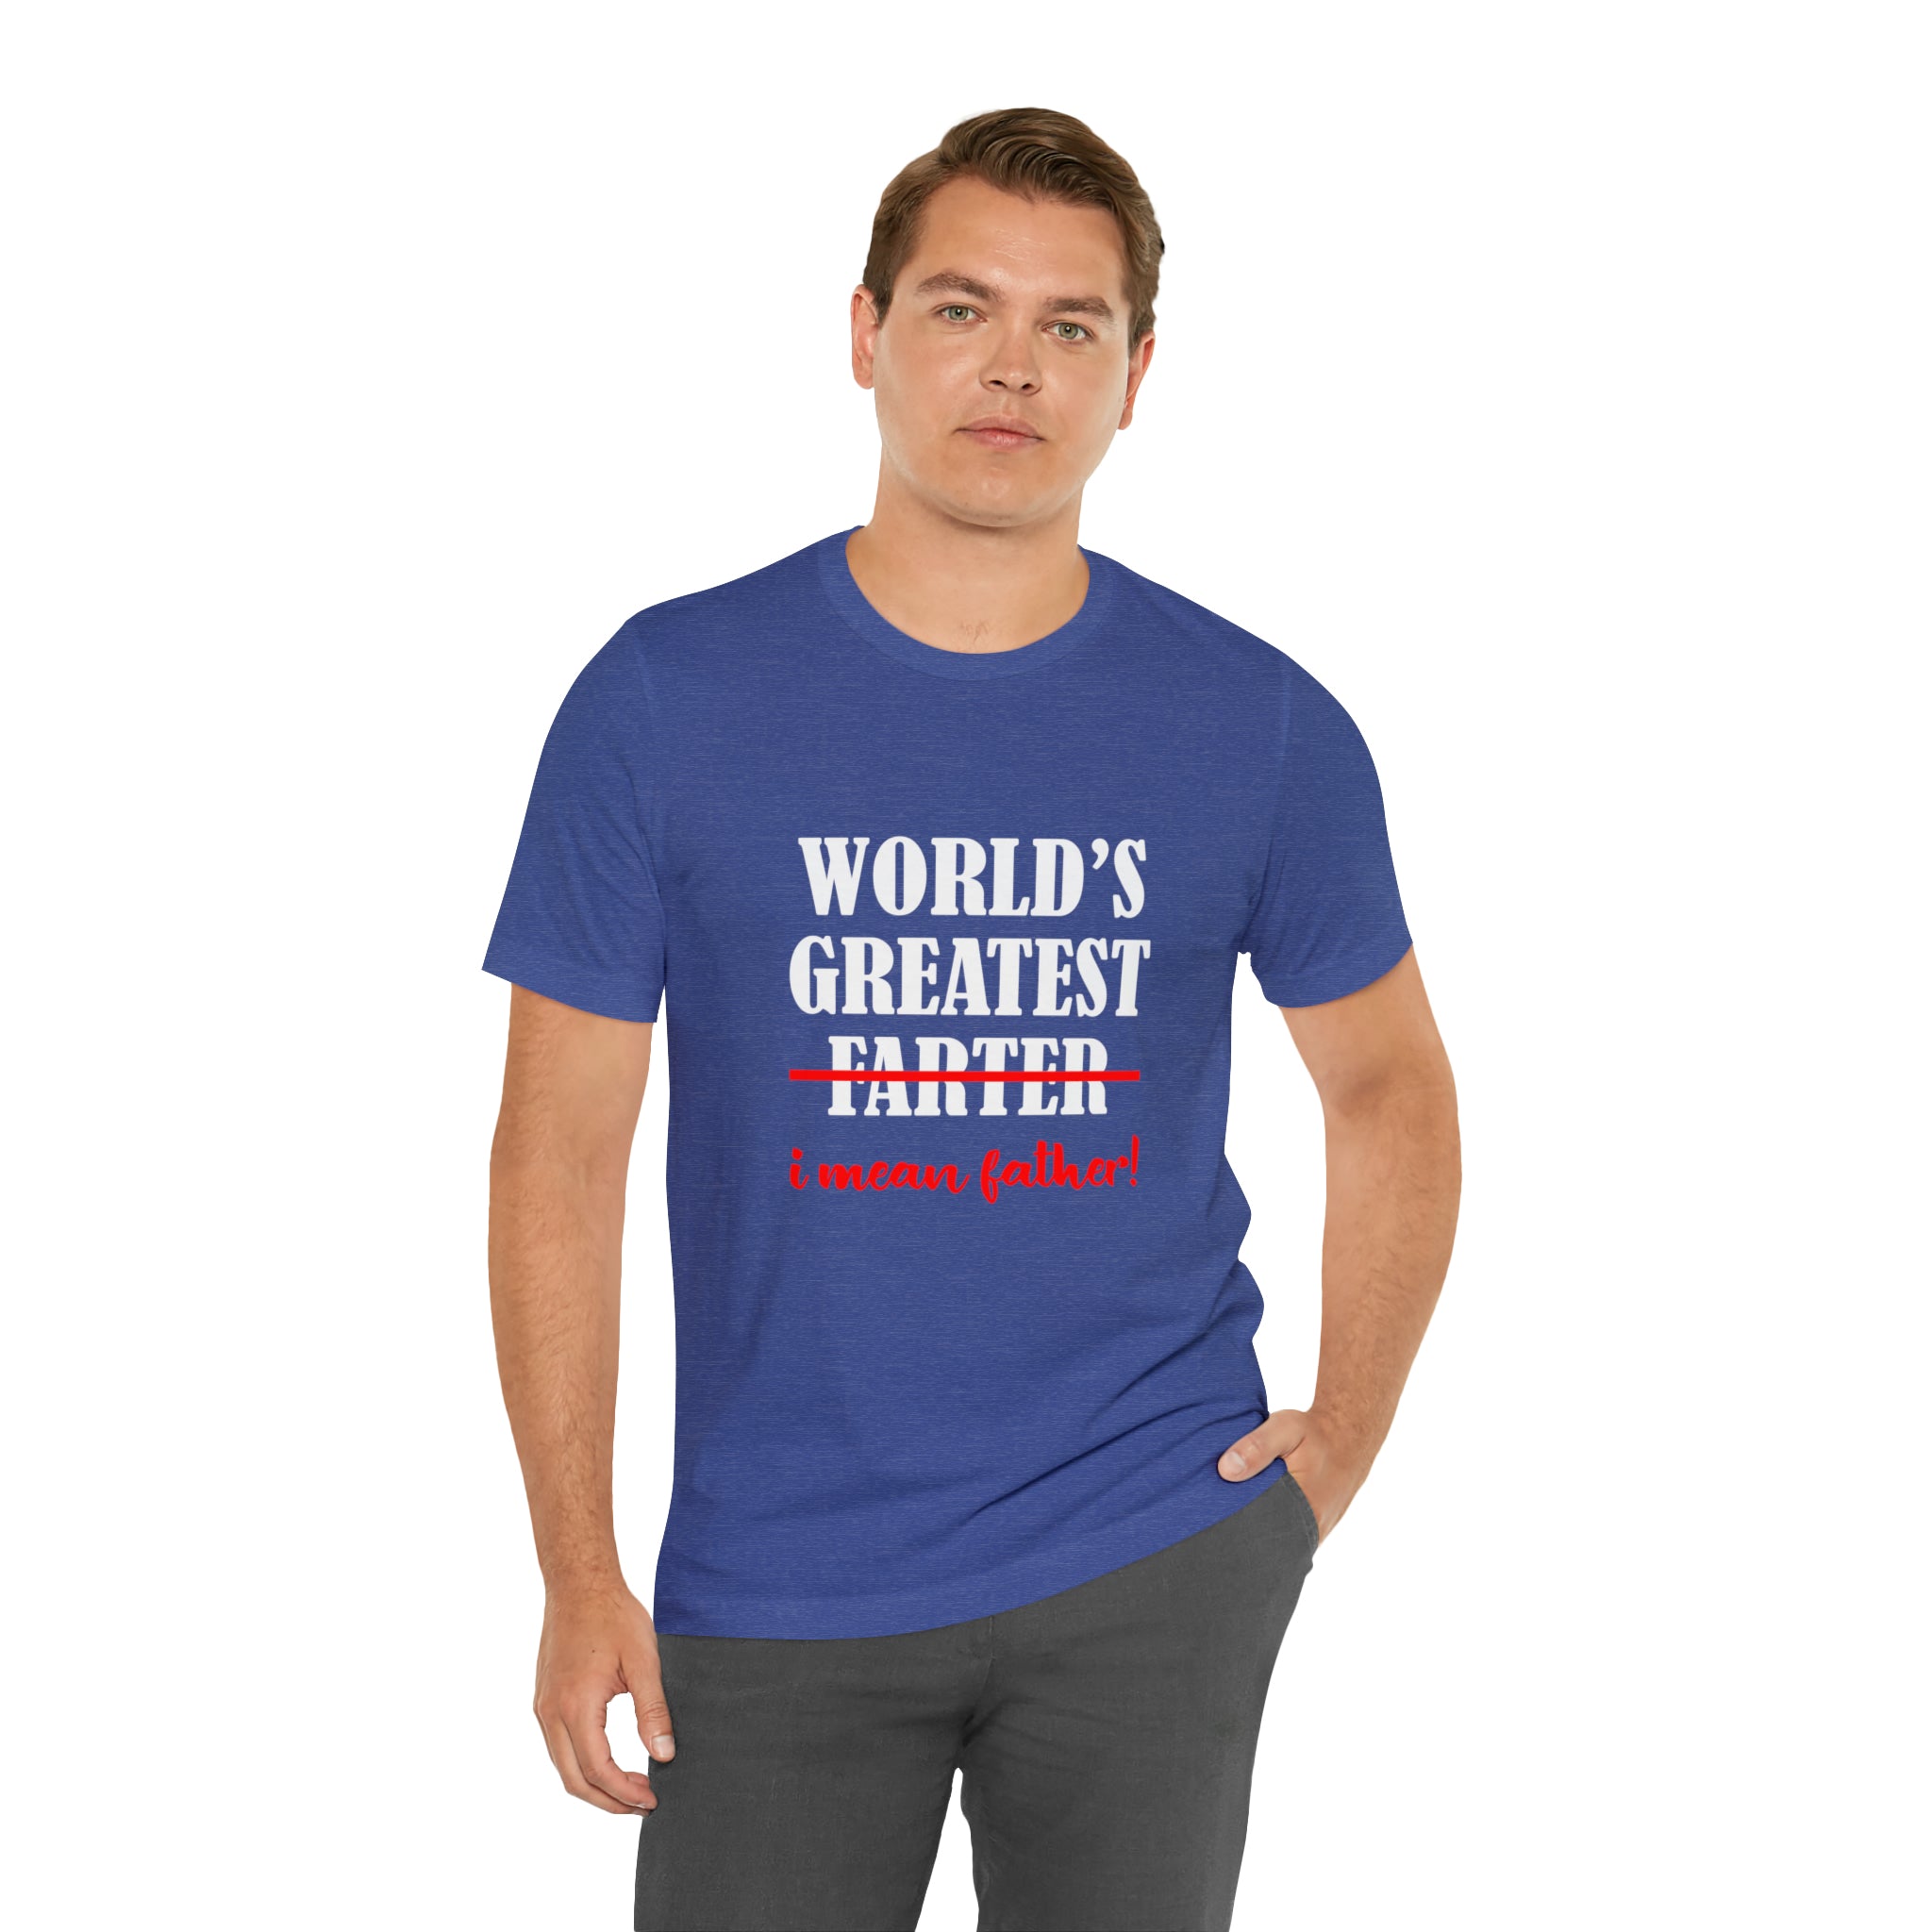 A father with a great sense of humor wears the "Worlds Greatest Farter I mean Father T-Shirt" declaring him the world's greatest dad.